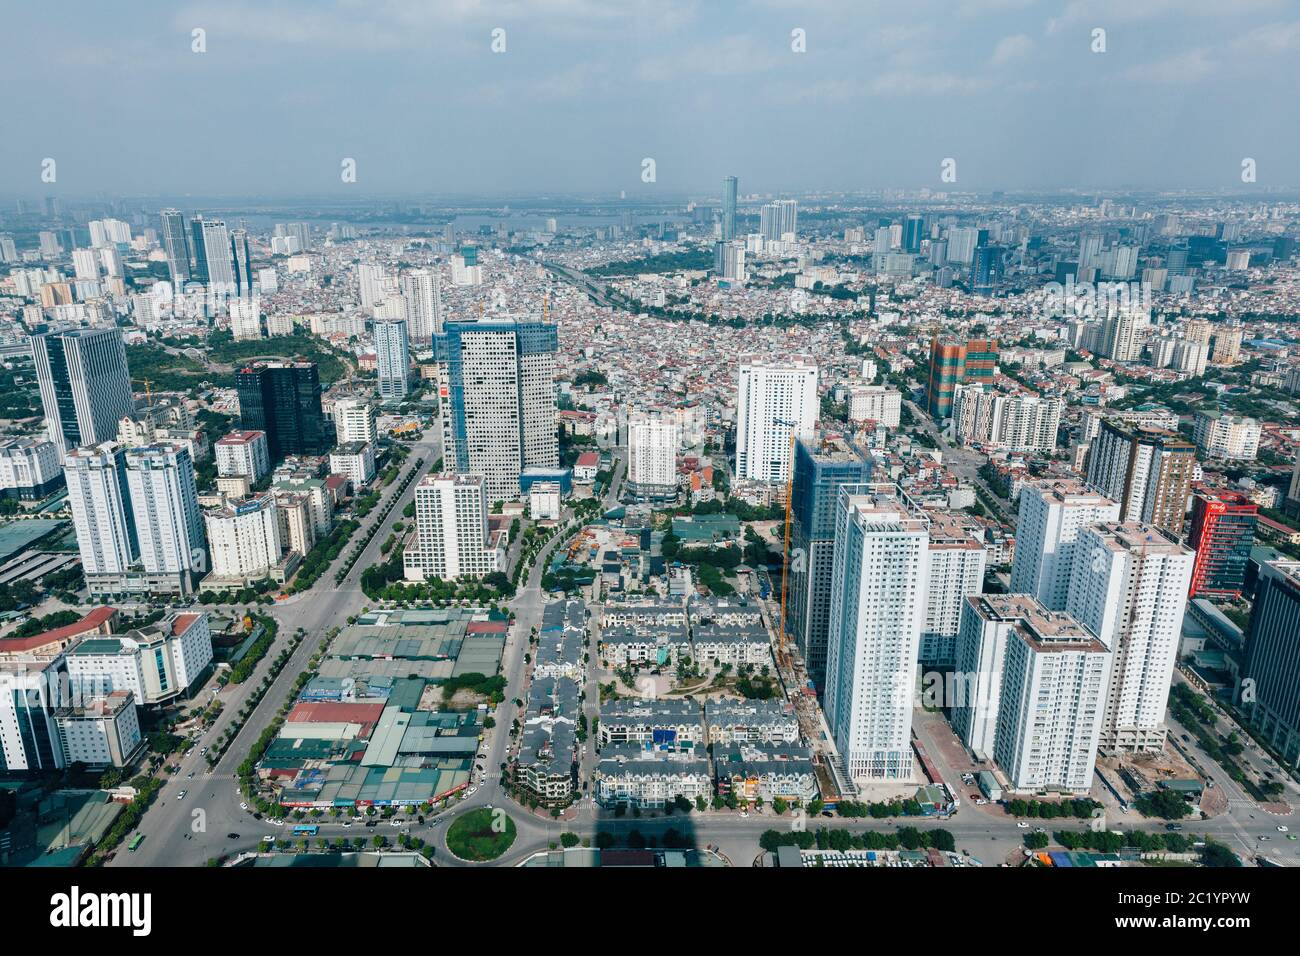 Hanoi city view from one of the higest buildings in the city, Hanoi, Vietnam Stock Photo